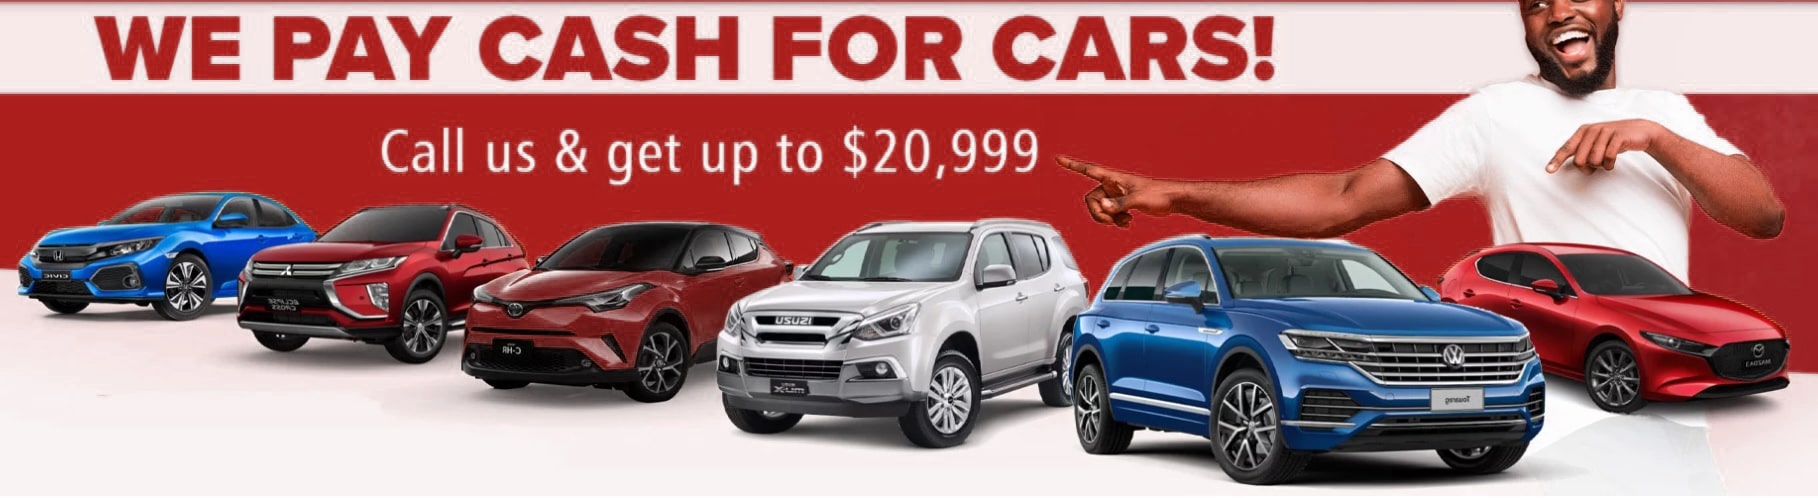 Cash for Cars Red Hill